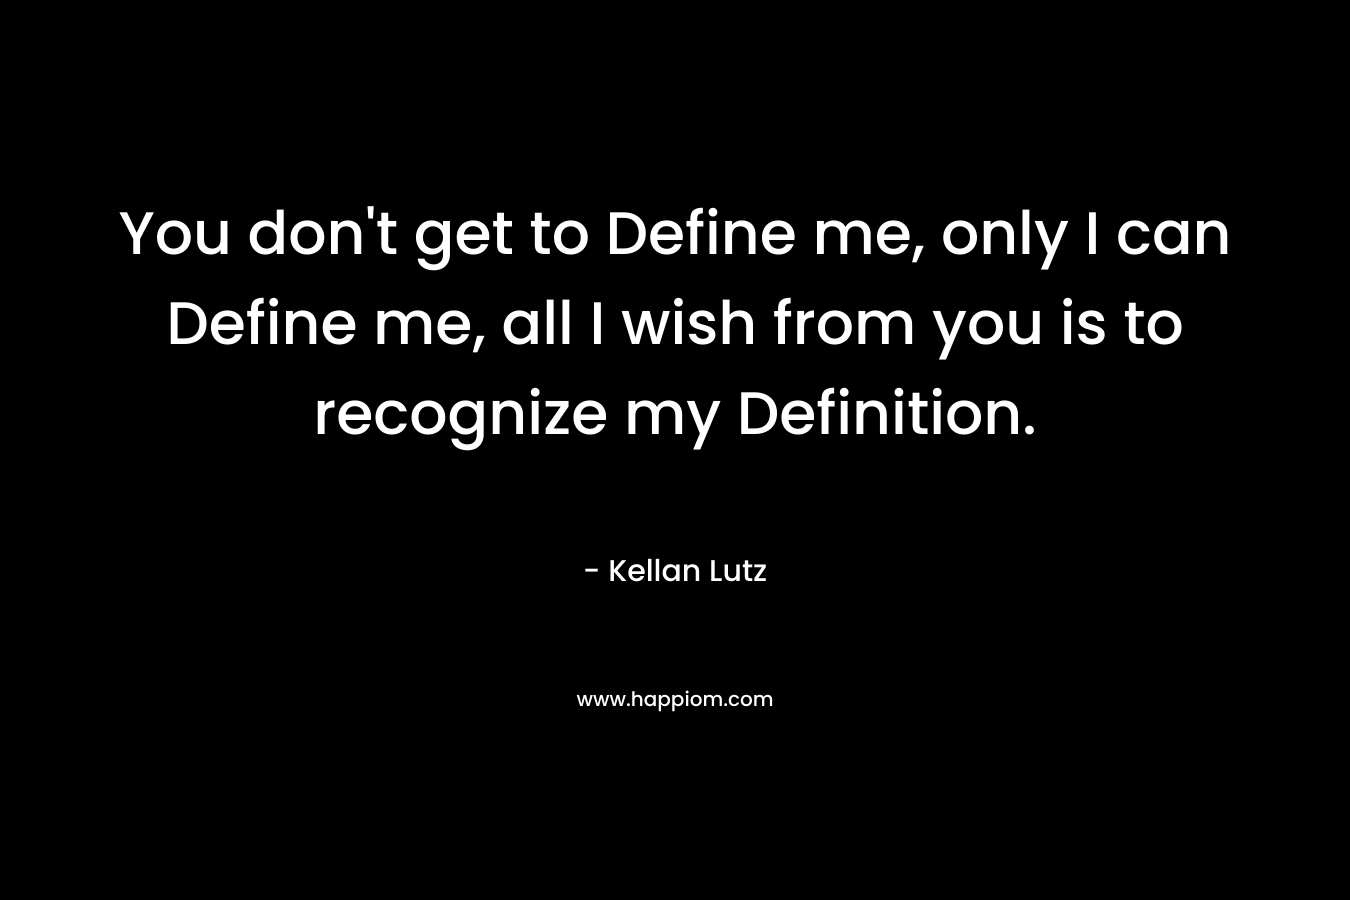 You don’t get to Define me, only I can Define me, all I wish from you is to recognize my Definition. – Kellan Lutz